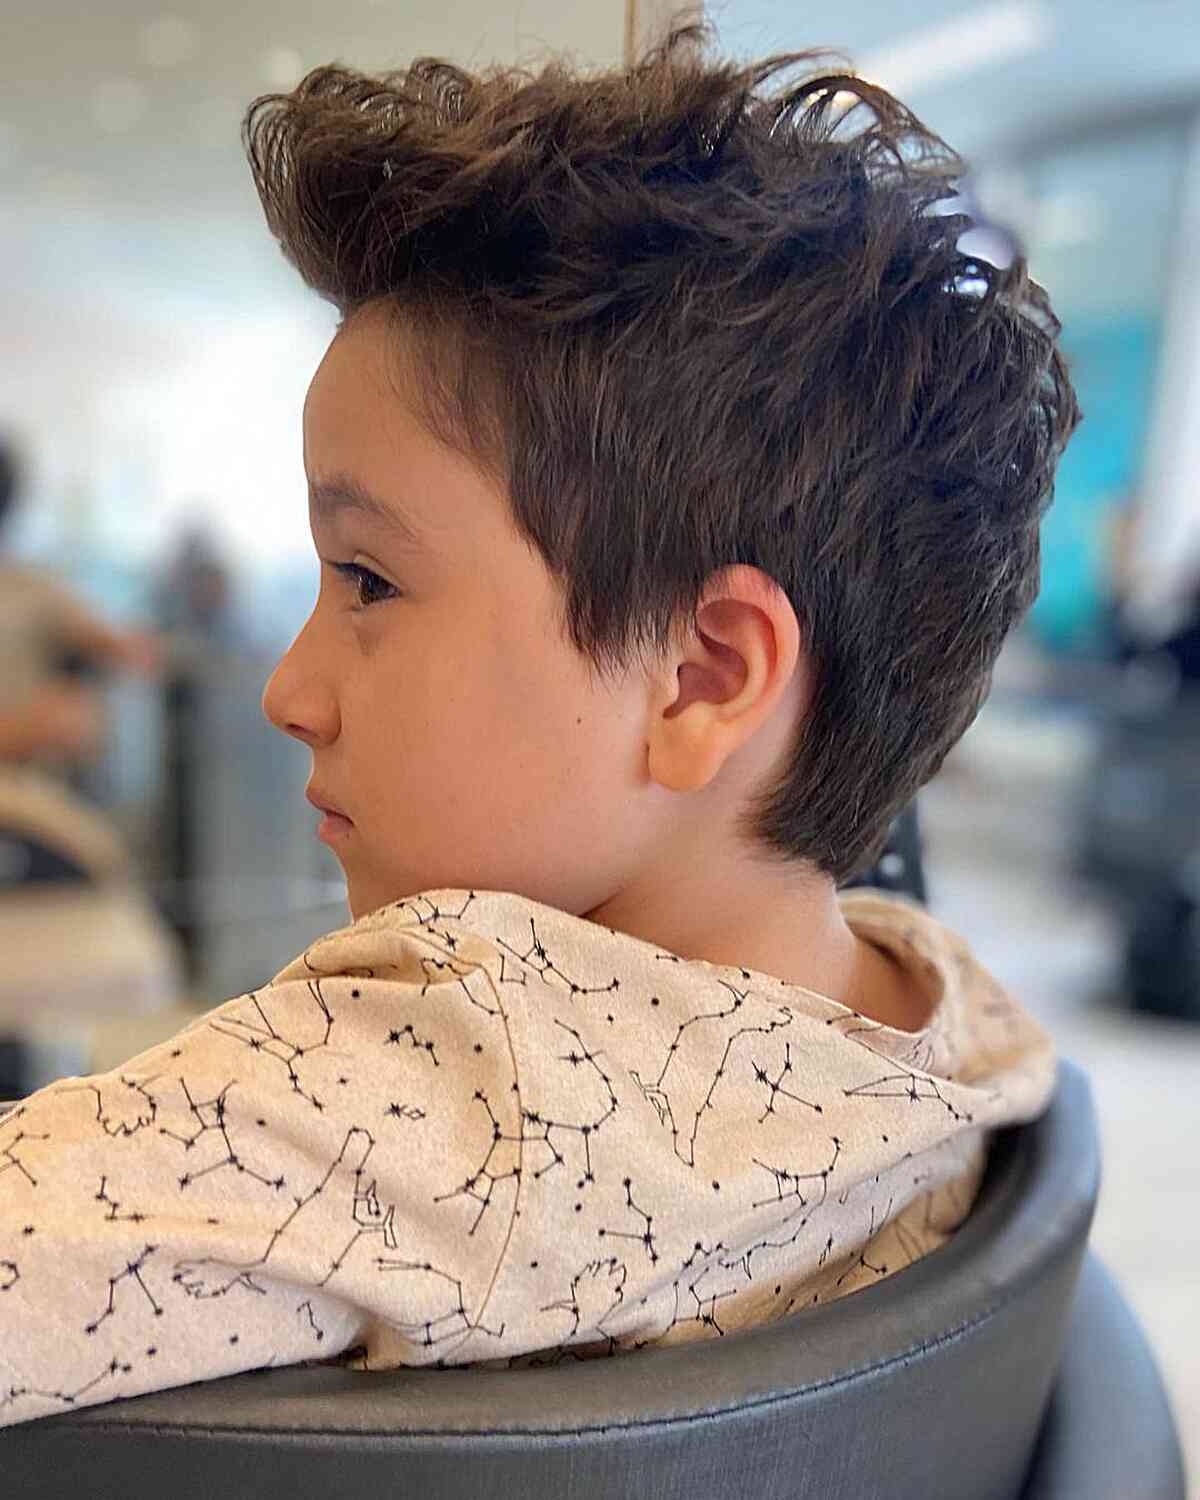 35 Trendy Hairstyles for Boys You'll See in 2023 – Cool Men's Hair